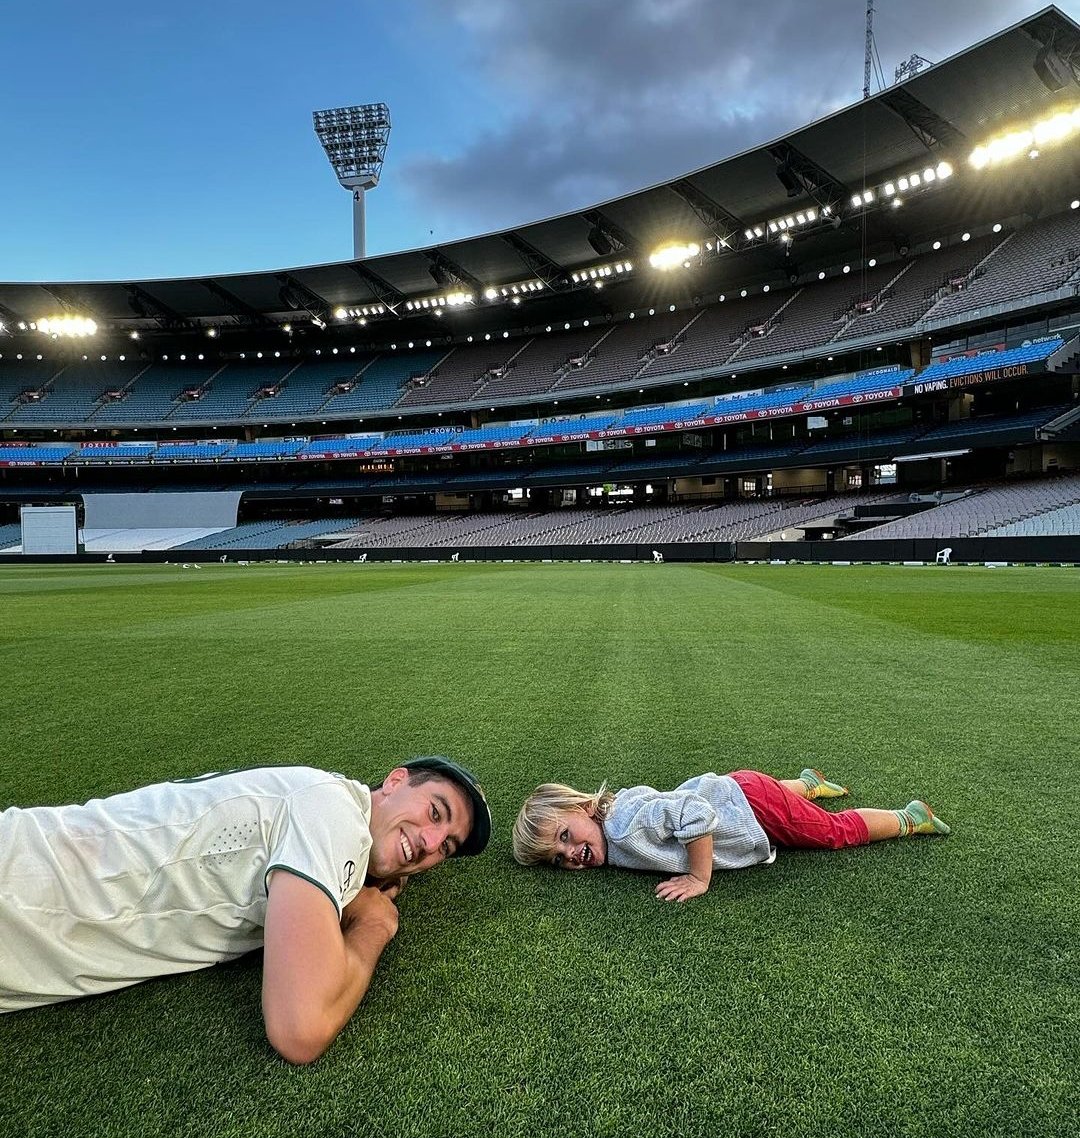 Pat Cummins with his son at MCG.

- A beautiful picture.